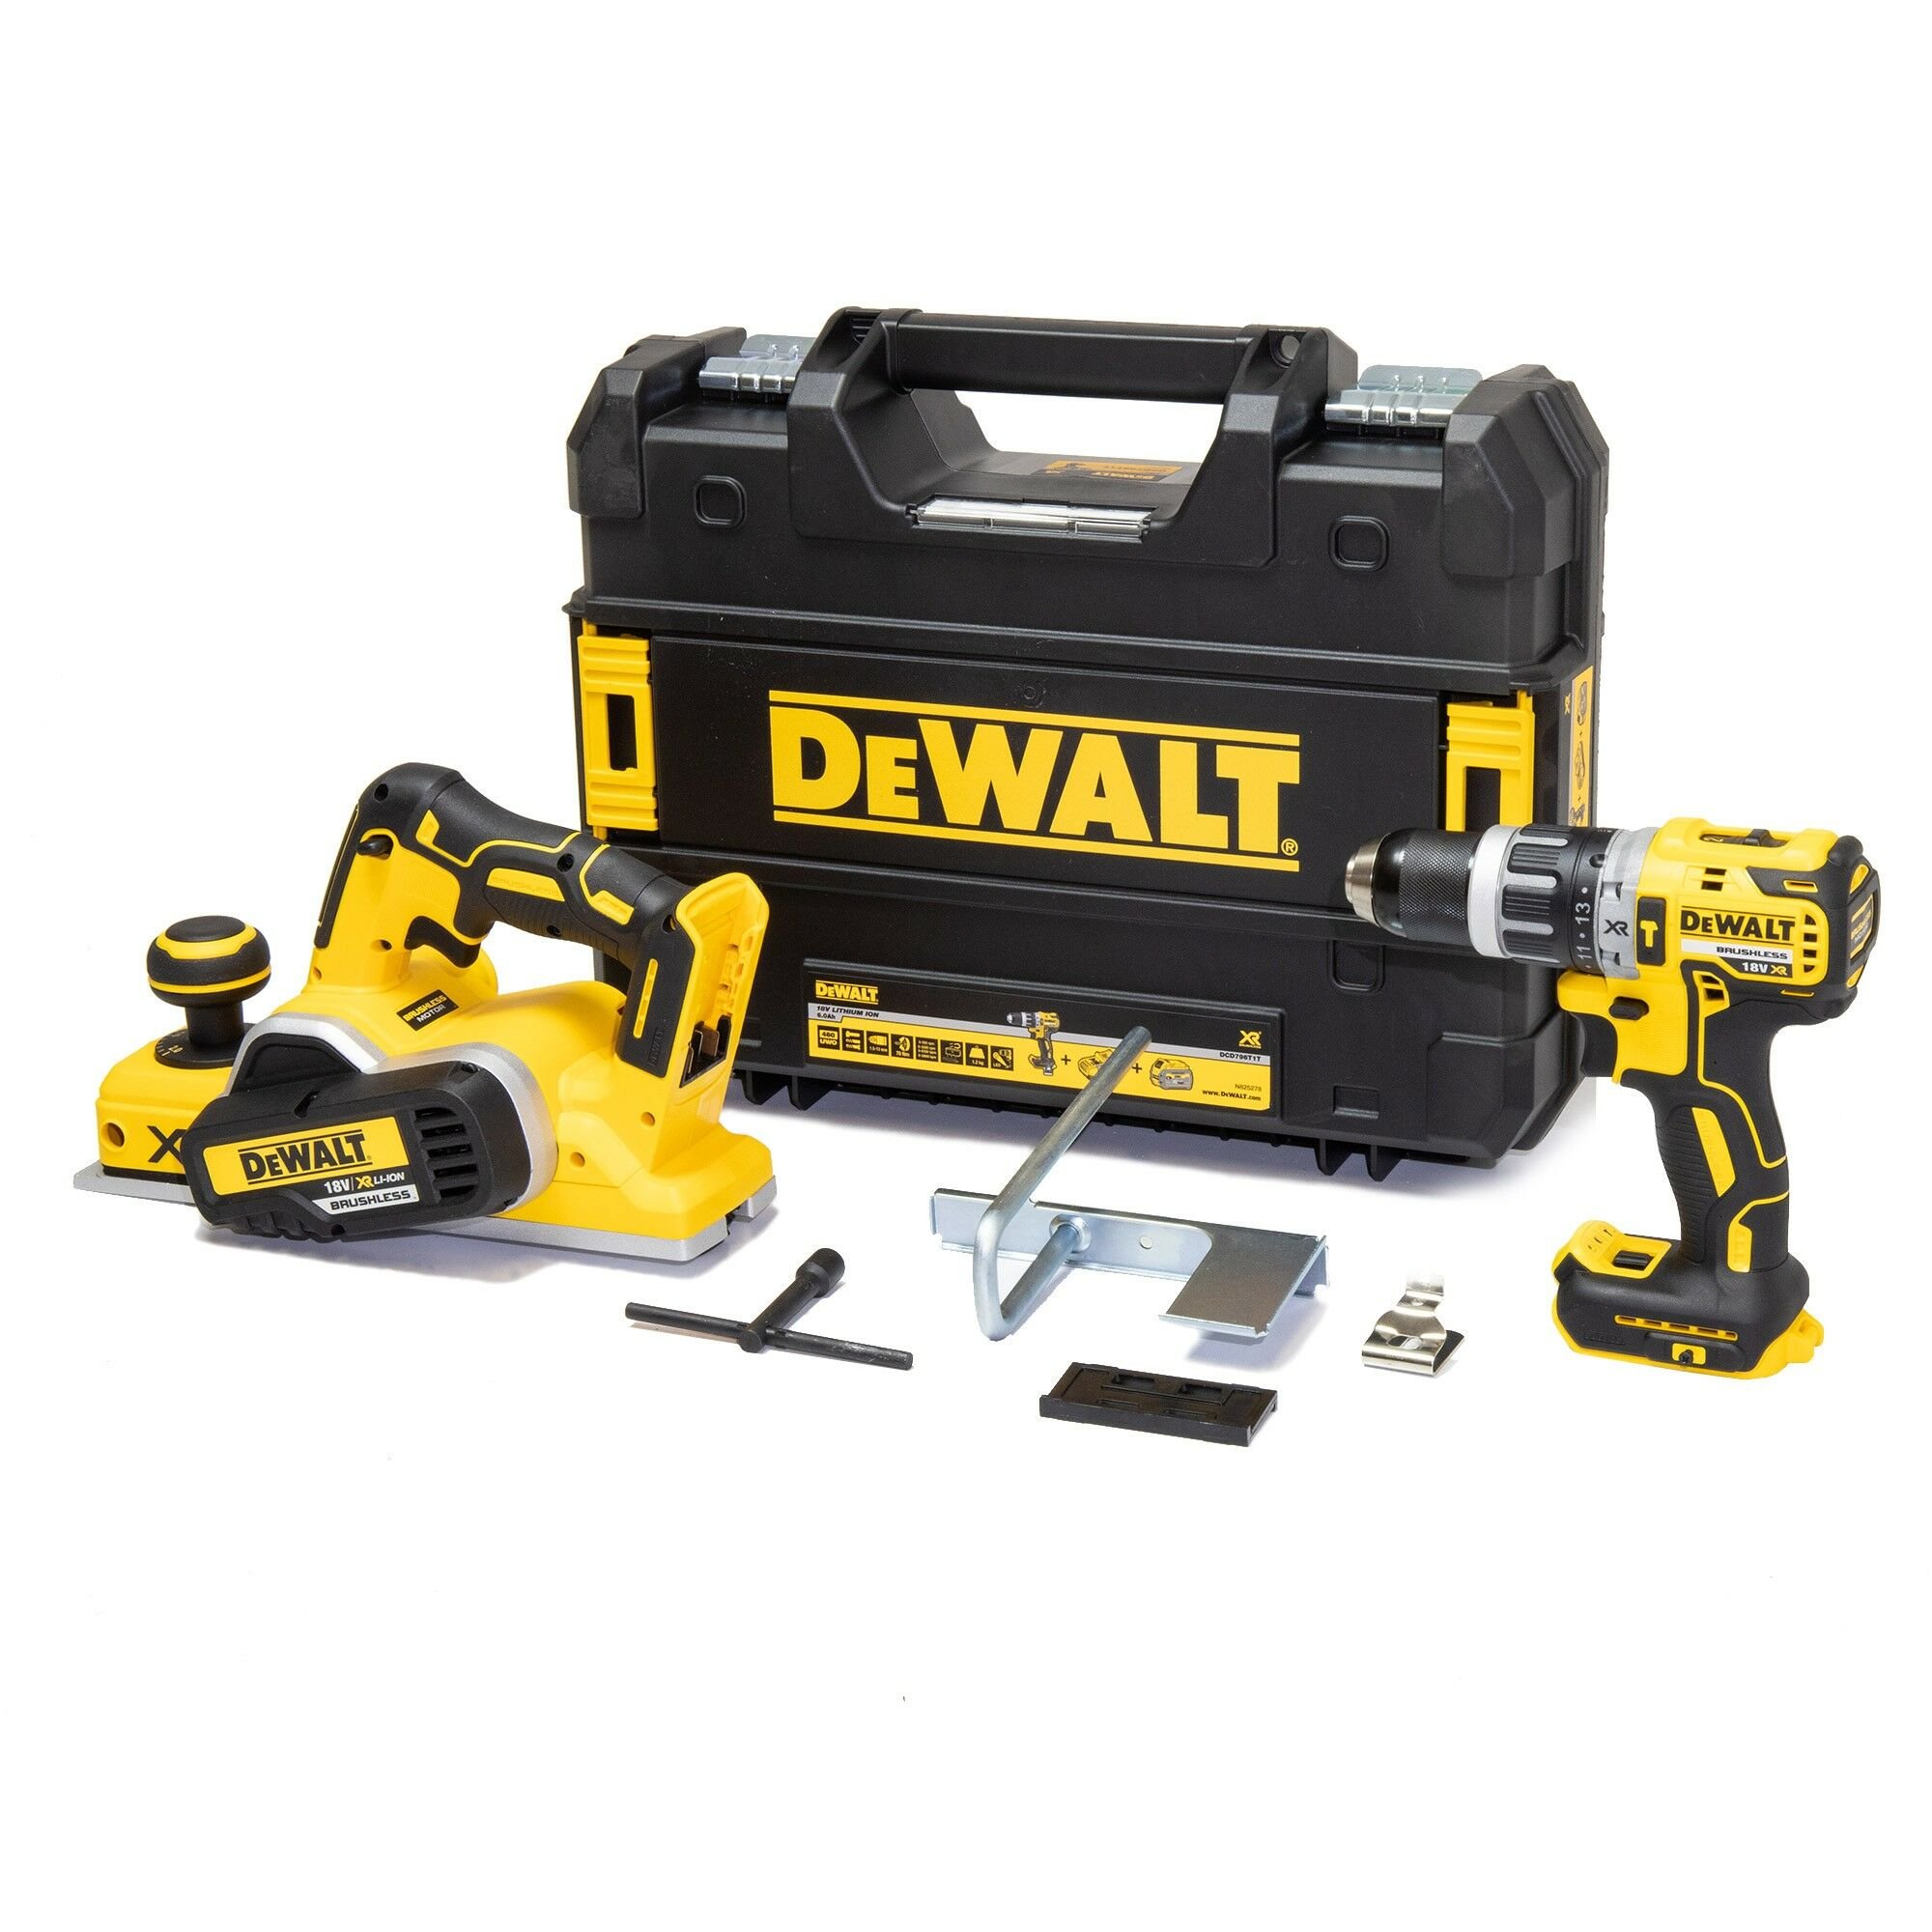 DeWalt DCD796NT-K1 18V Combi Drill and Planer (Body Only) With Case